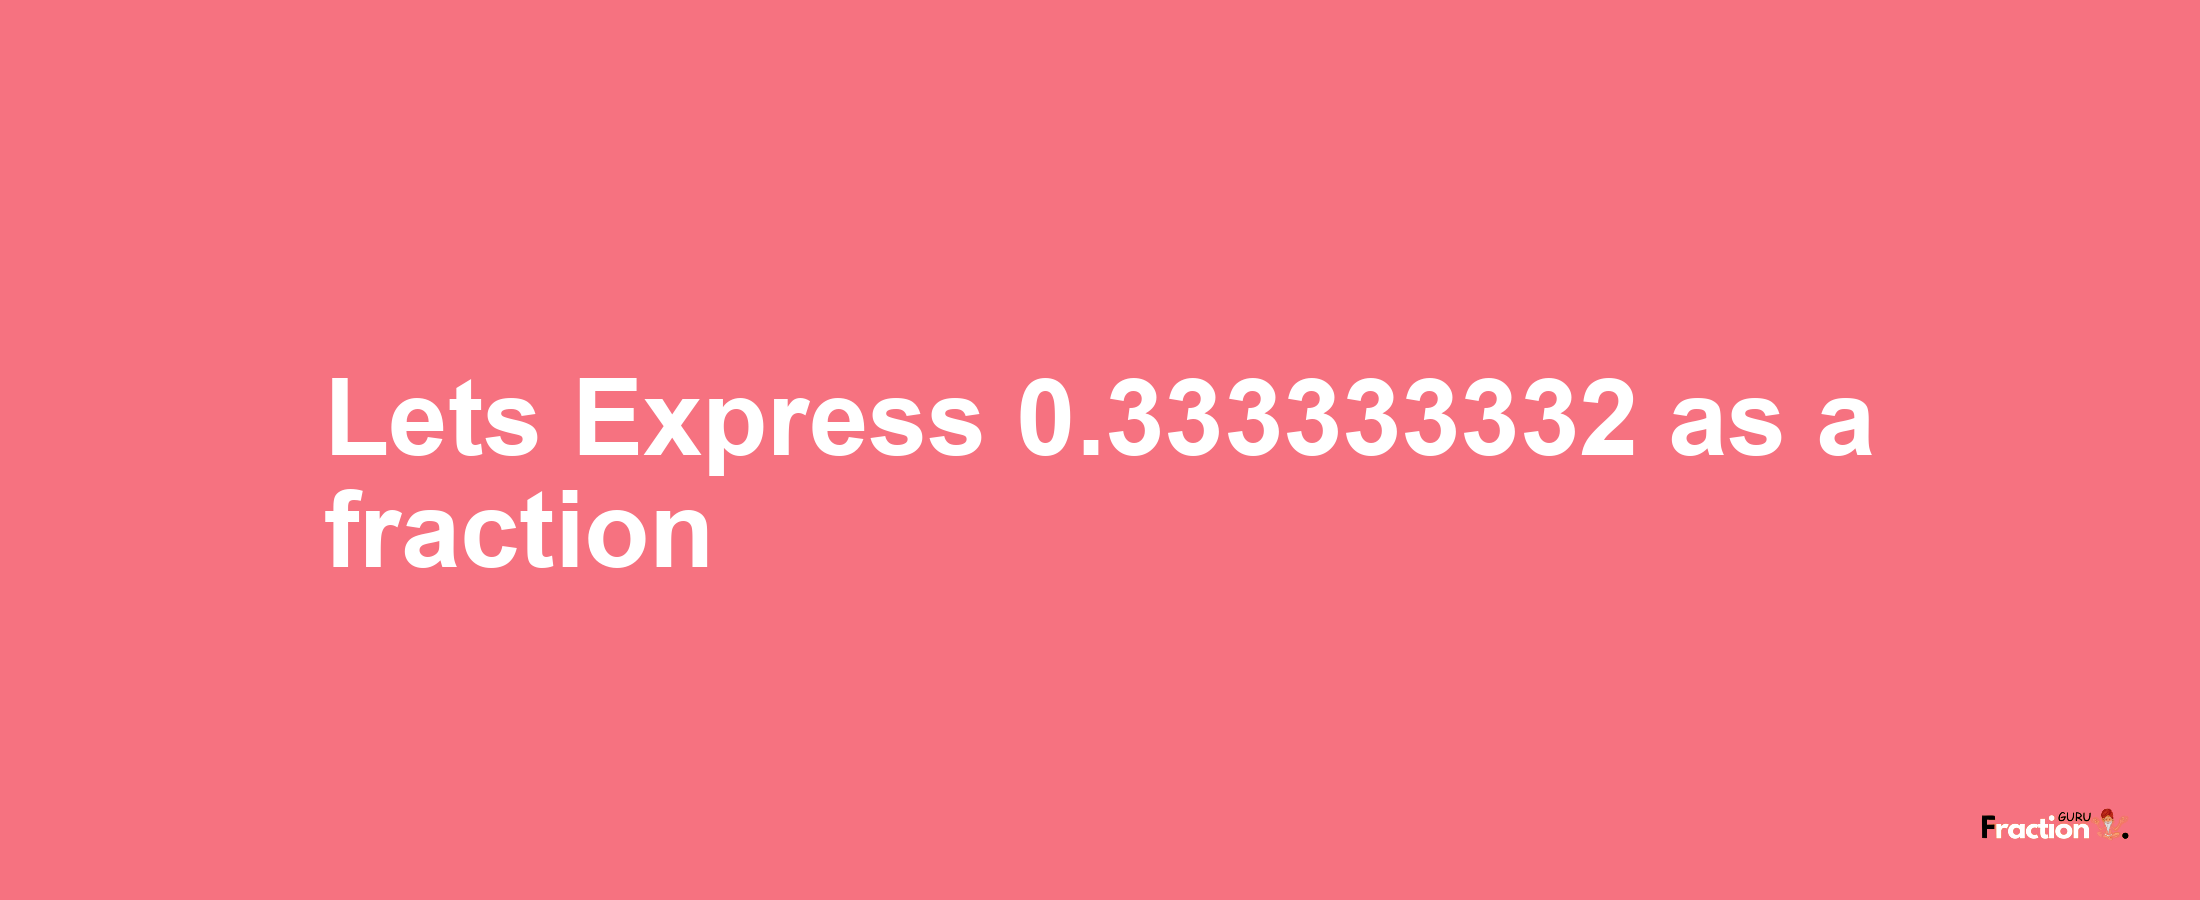 Lets Express 0.333333332 as afraction